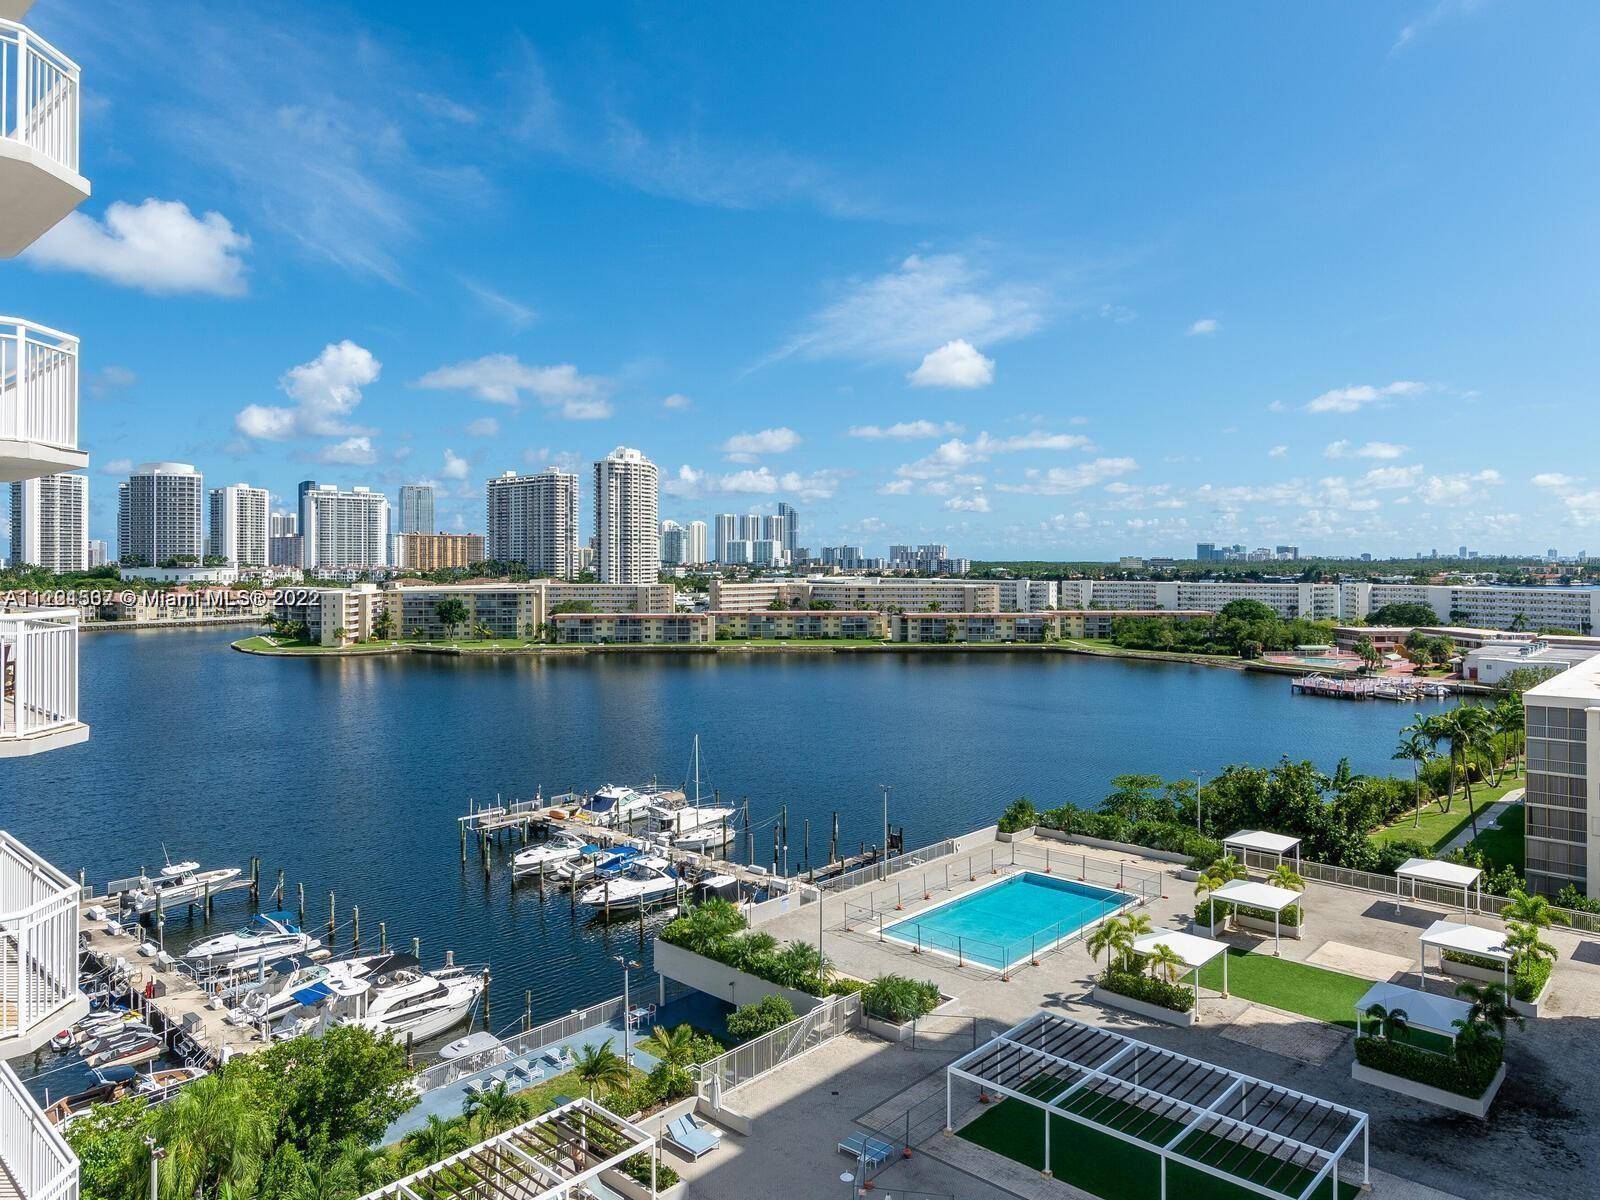 RENOVATED 2 Bed 2 Ba in a WATER FRONT building in the heart of Aventura.